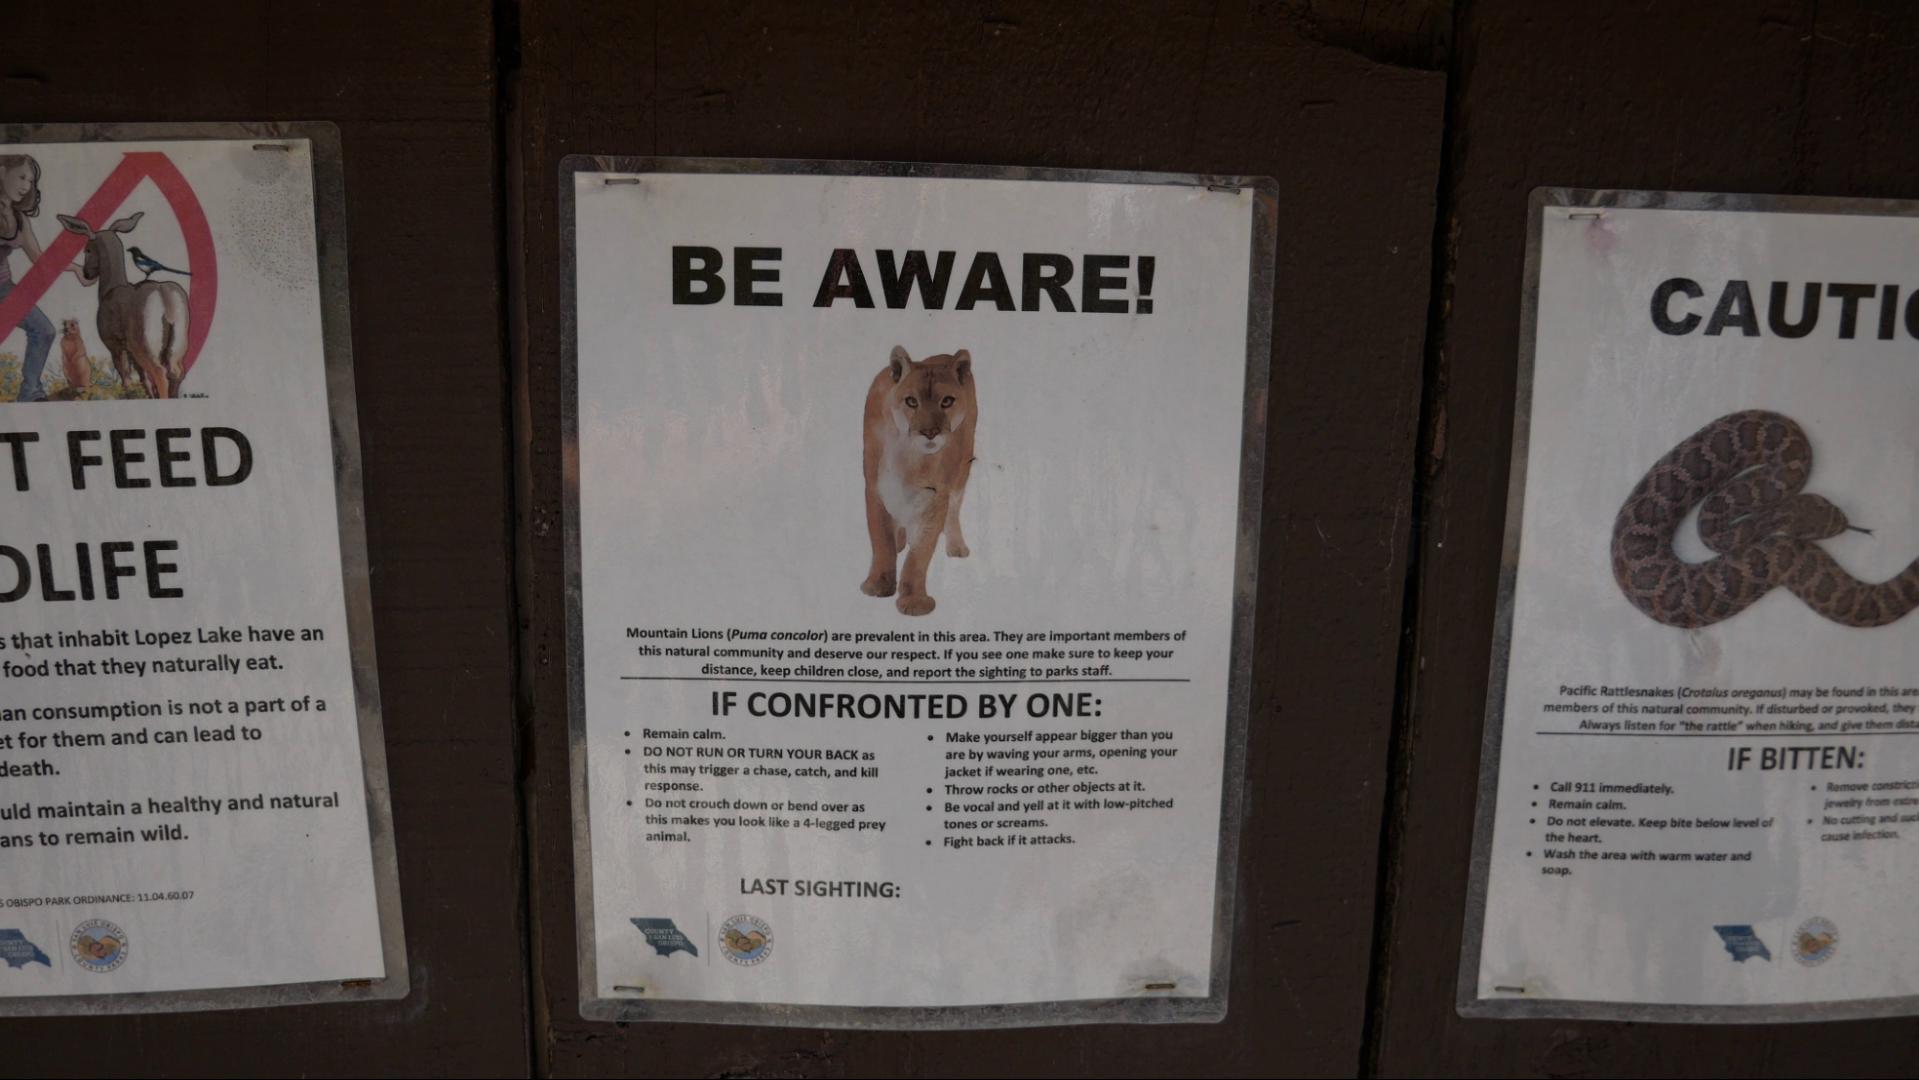 Lopez Lake is home to a lot of wildlife including bears, cougars, and rattlesnakes. Signs posted at the entrance and throughout the park detail what to do if these animals are encountered on your visit. 